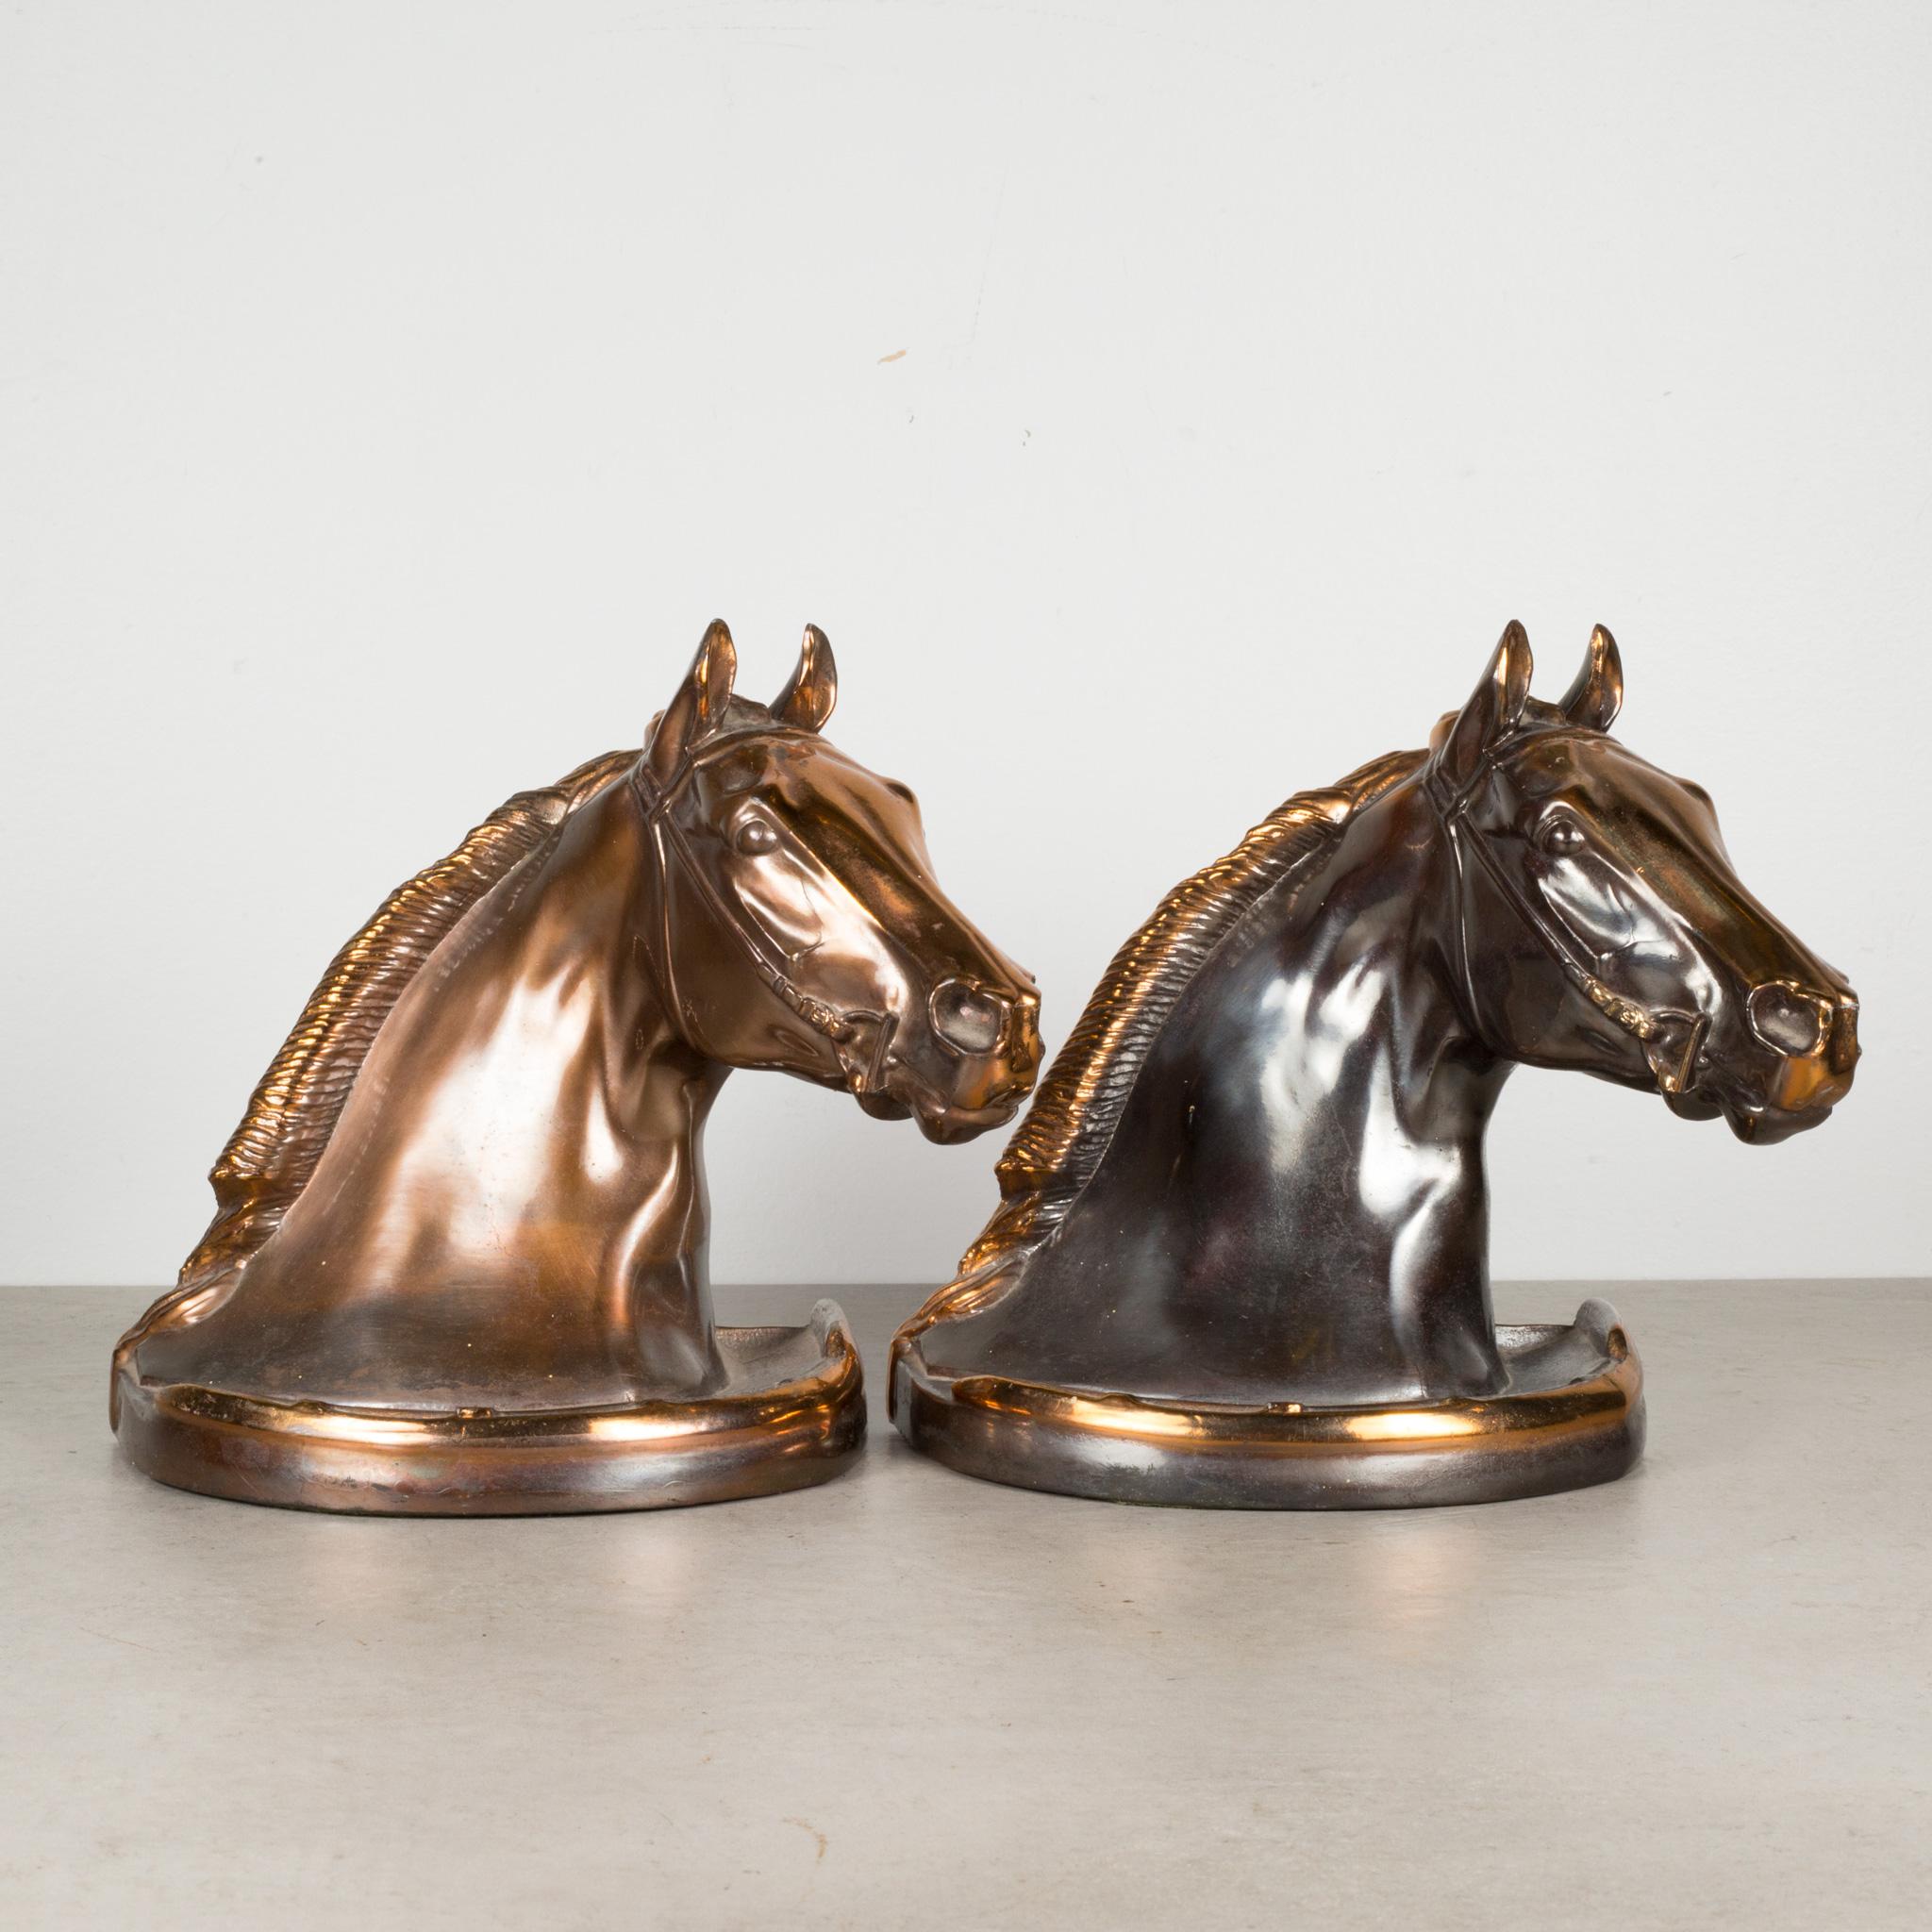 About

An original pair of bronze and copper plated horse head bookends designed by Gladys E. Brown and manufactured by Dodge Trophy Inc. Los Angeles California USA.

The bookends are embossed by the artist with the year '46 stamped on the back.